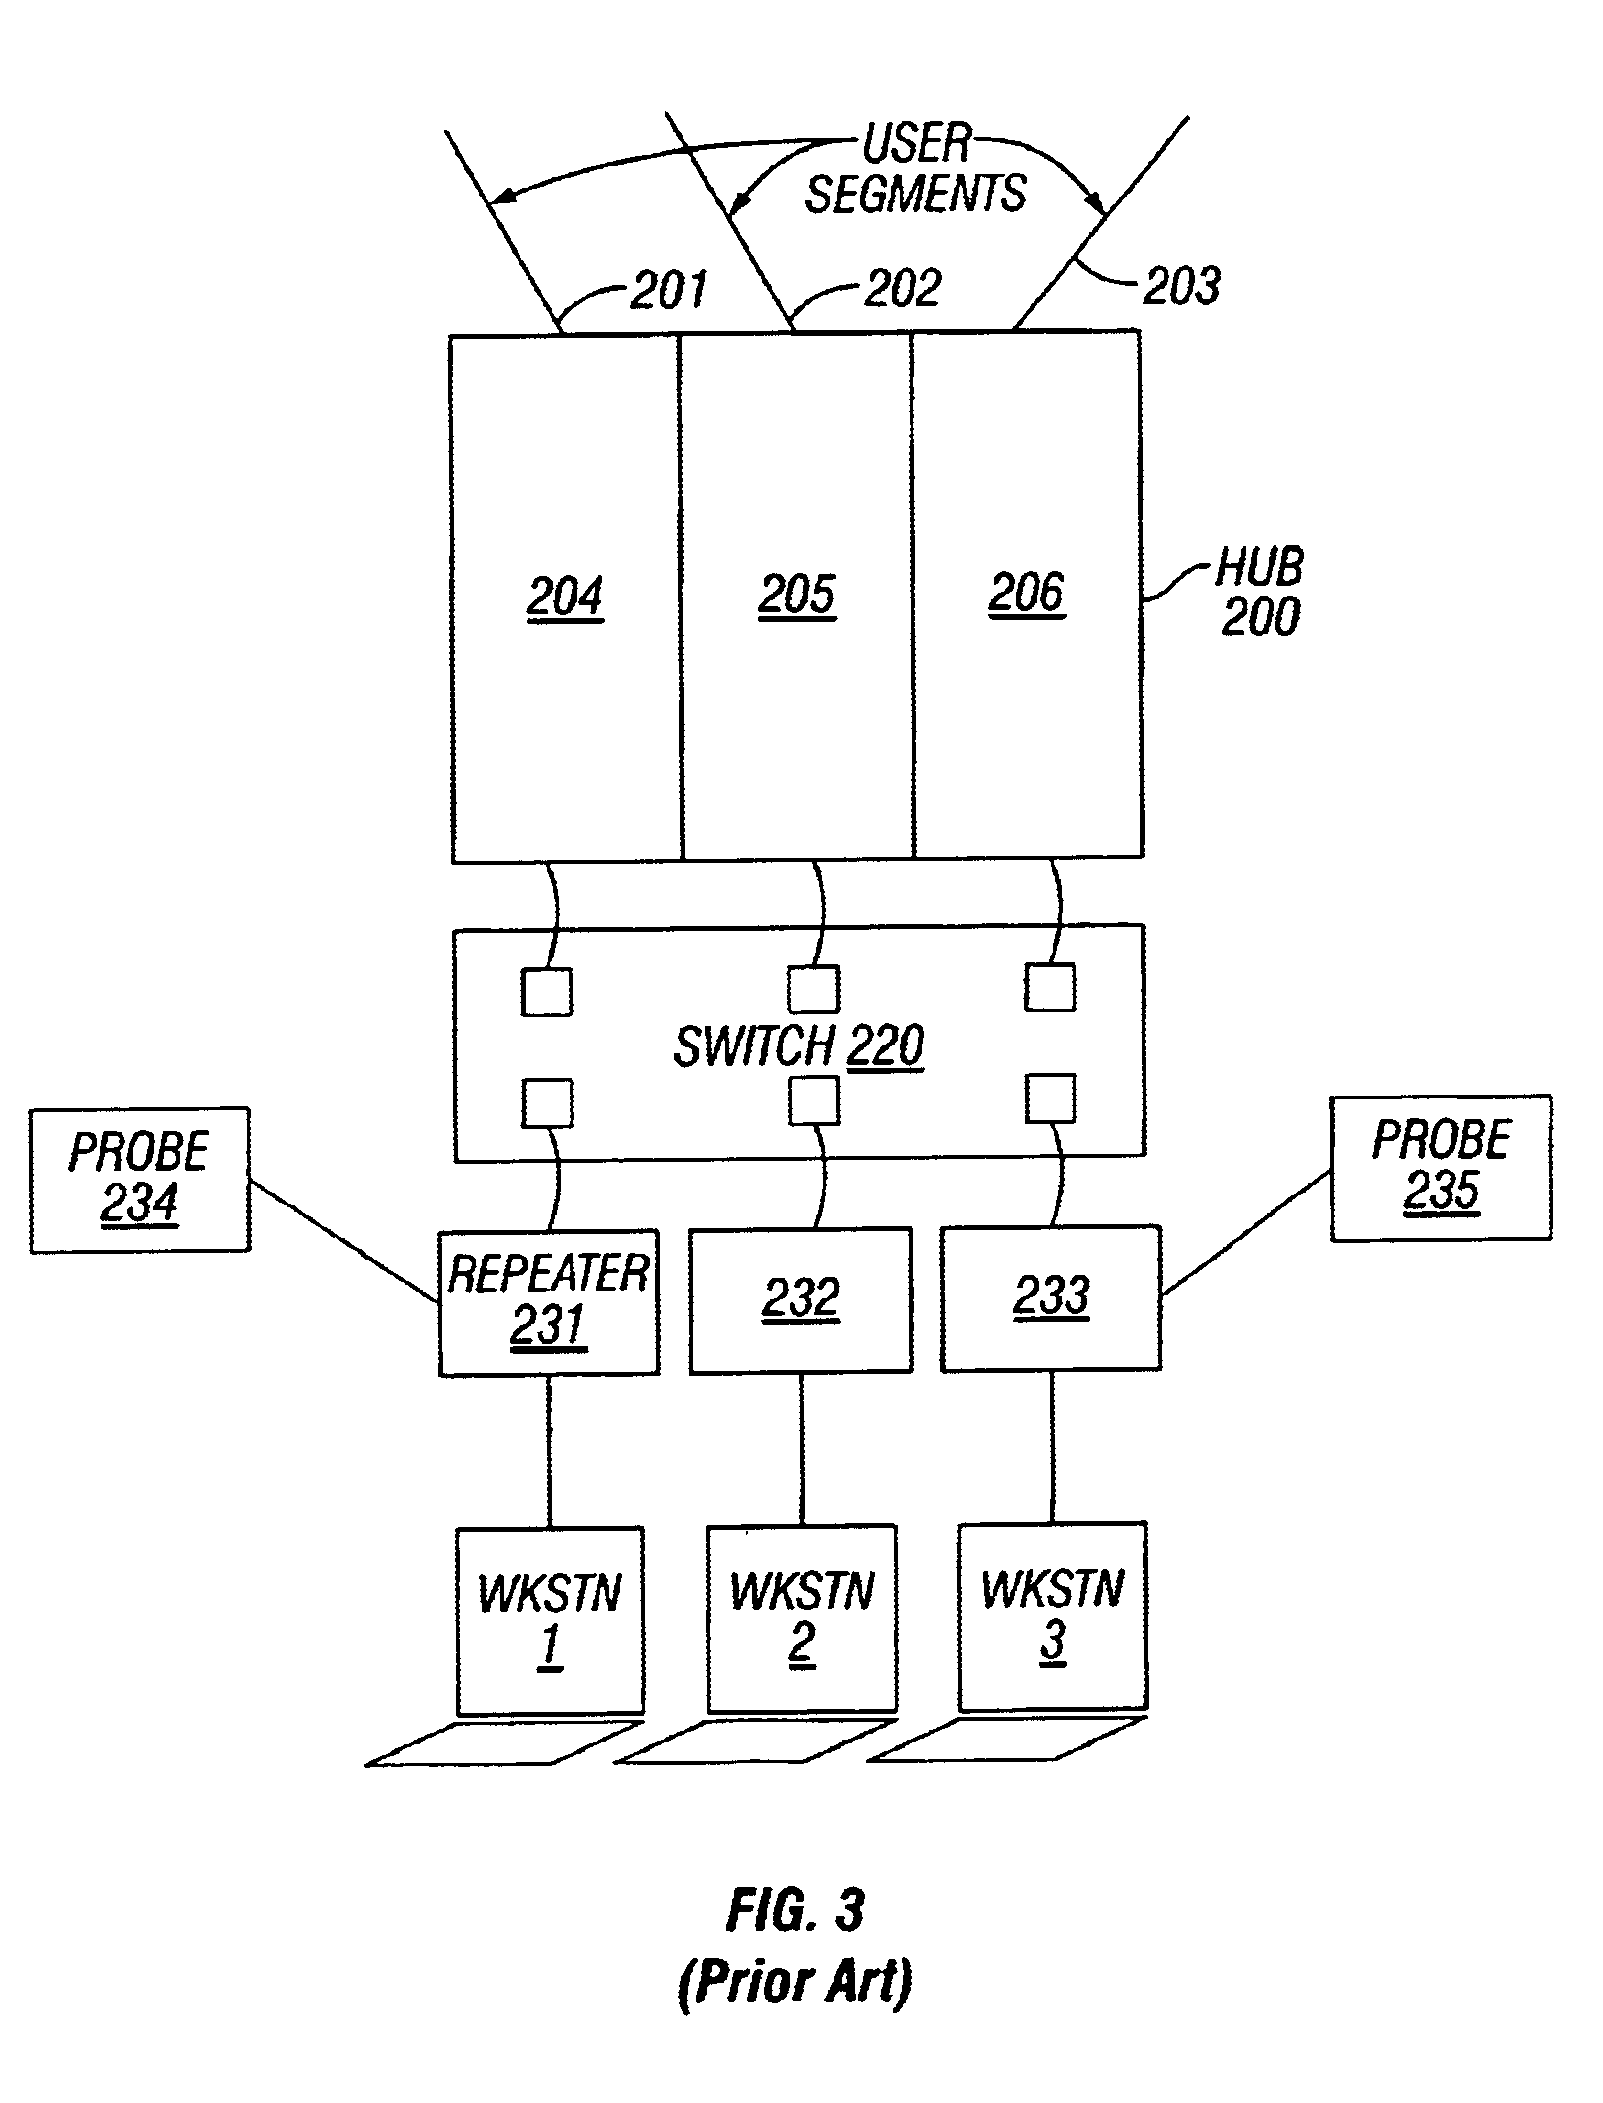 Method for a network device inserted between point to point connected stations to automatically negotiate communication parameters between the stations